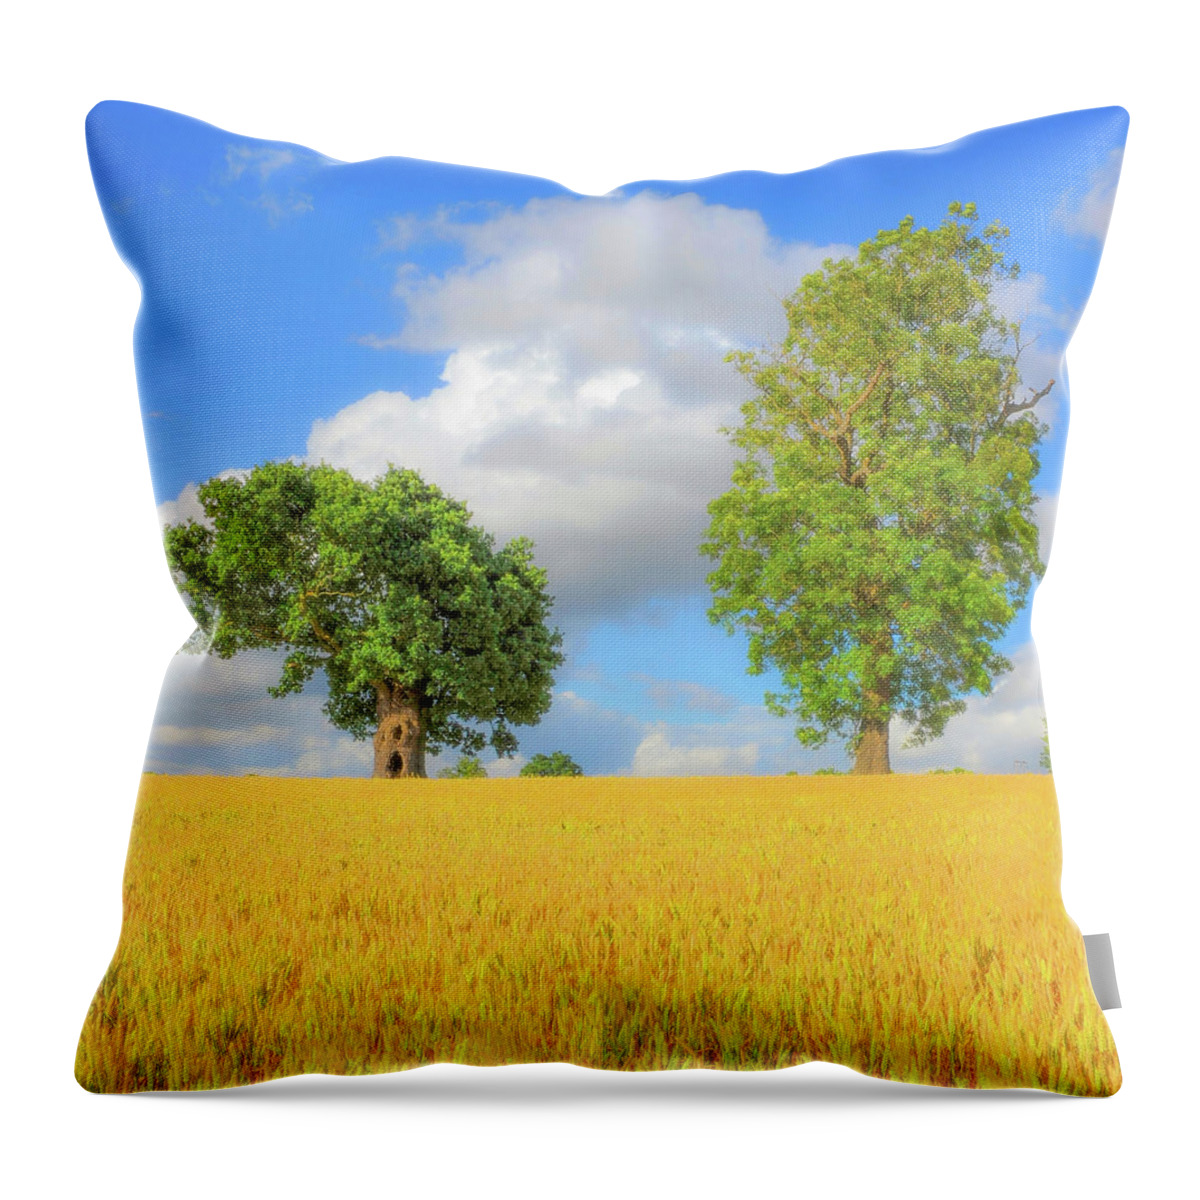 England Throw Pillow featuring the digital art Couple by Remigiusz MARCZAK